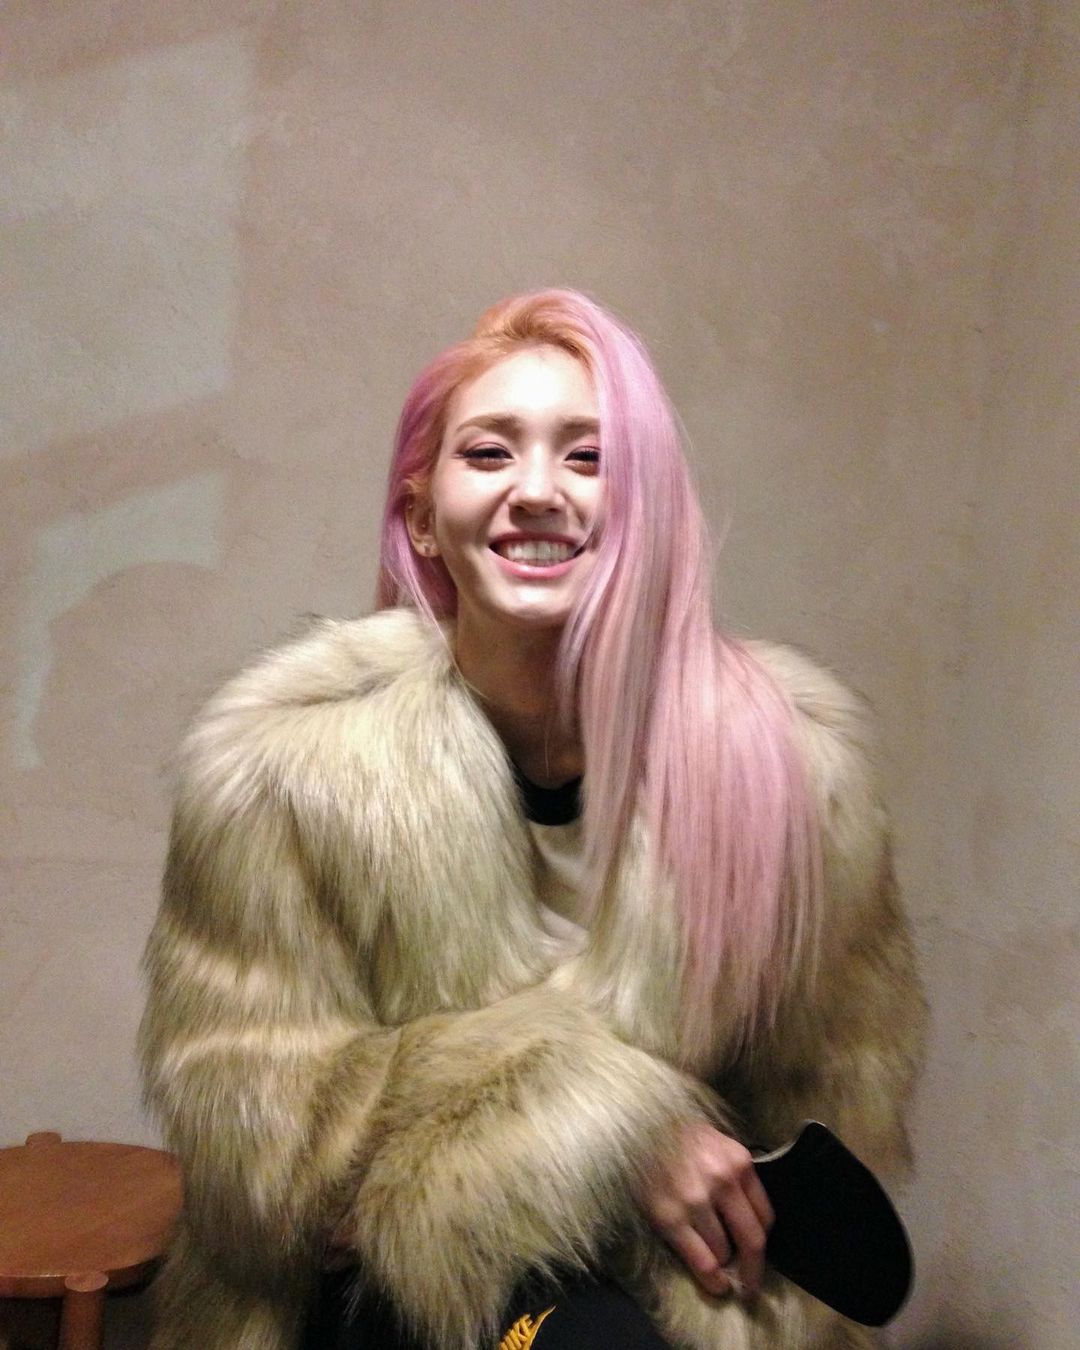 JEON SOMI, gorgeous pink hair + fur outer... The doll itself